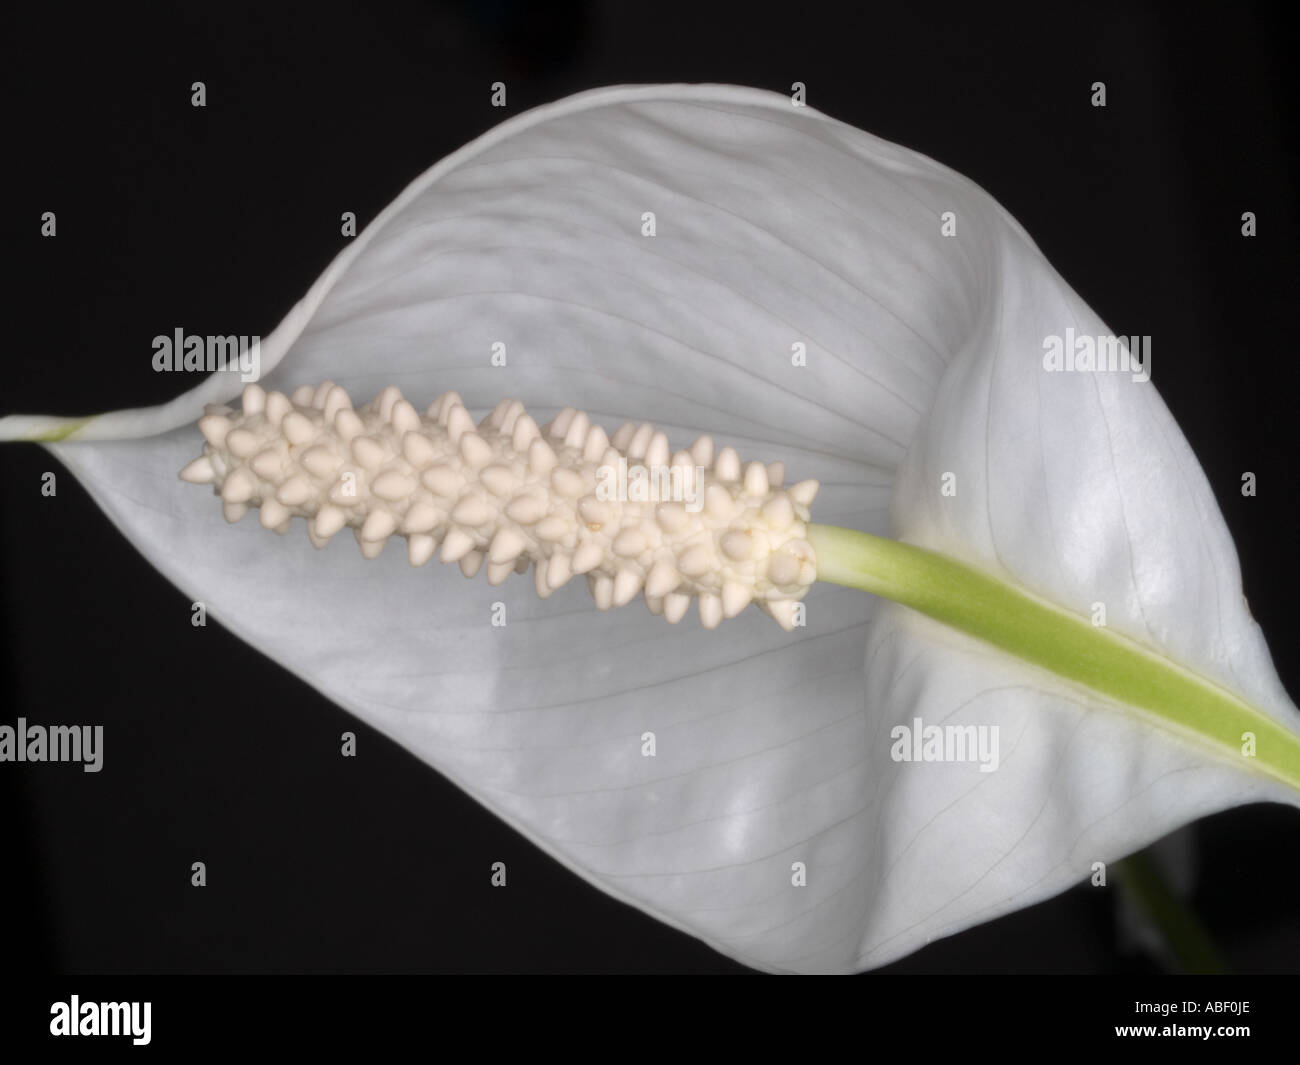 Extreme close-up of Spathiphyllum flower head showing cream colored spadix and white spath or stamen Stock Photo